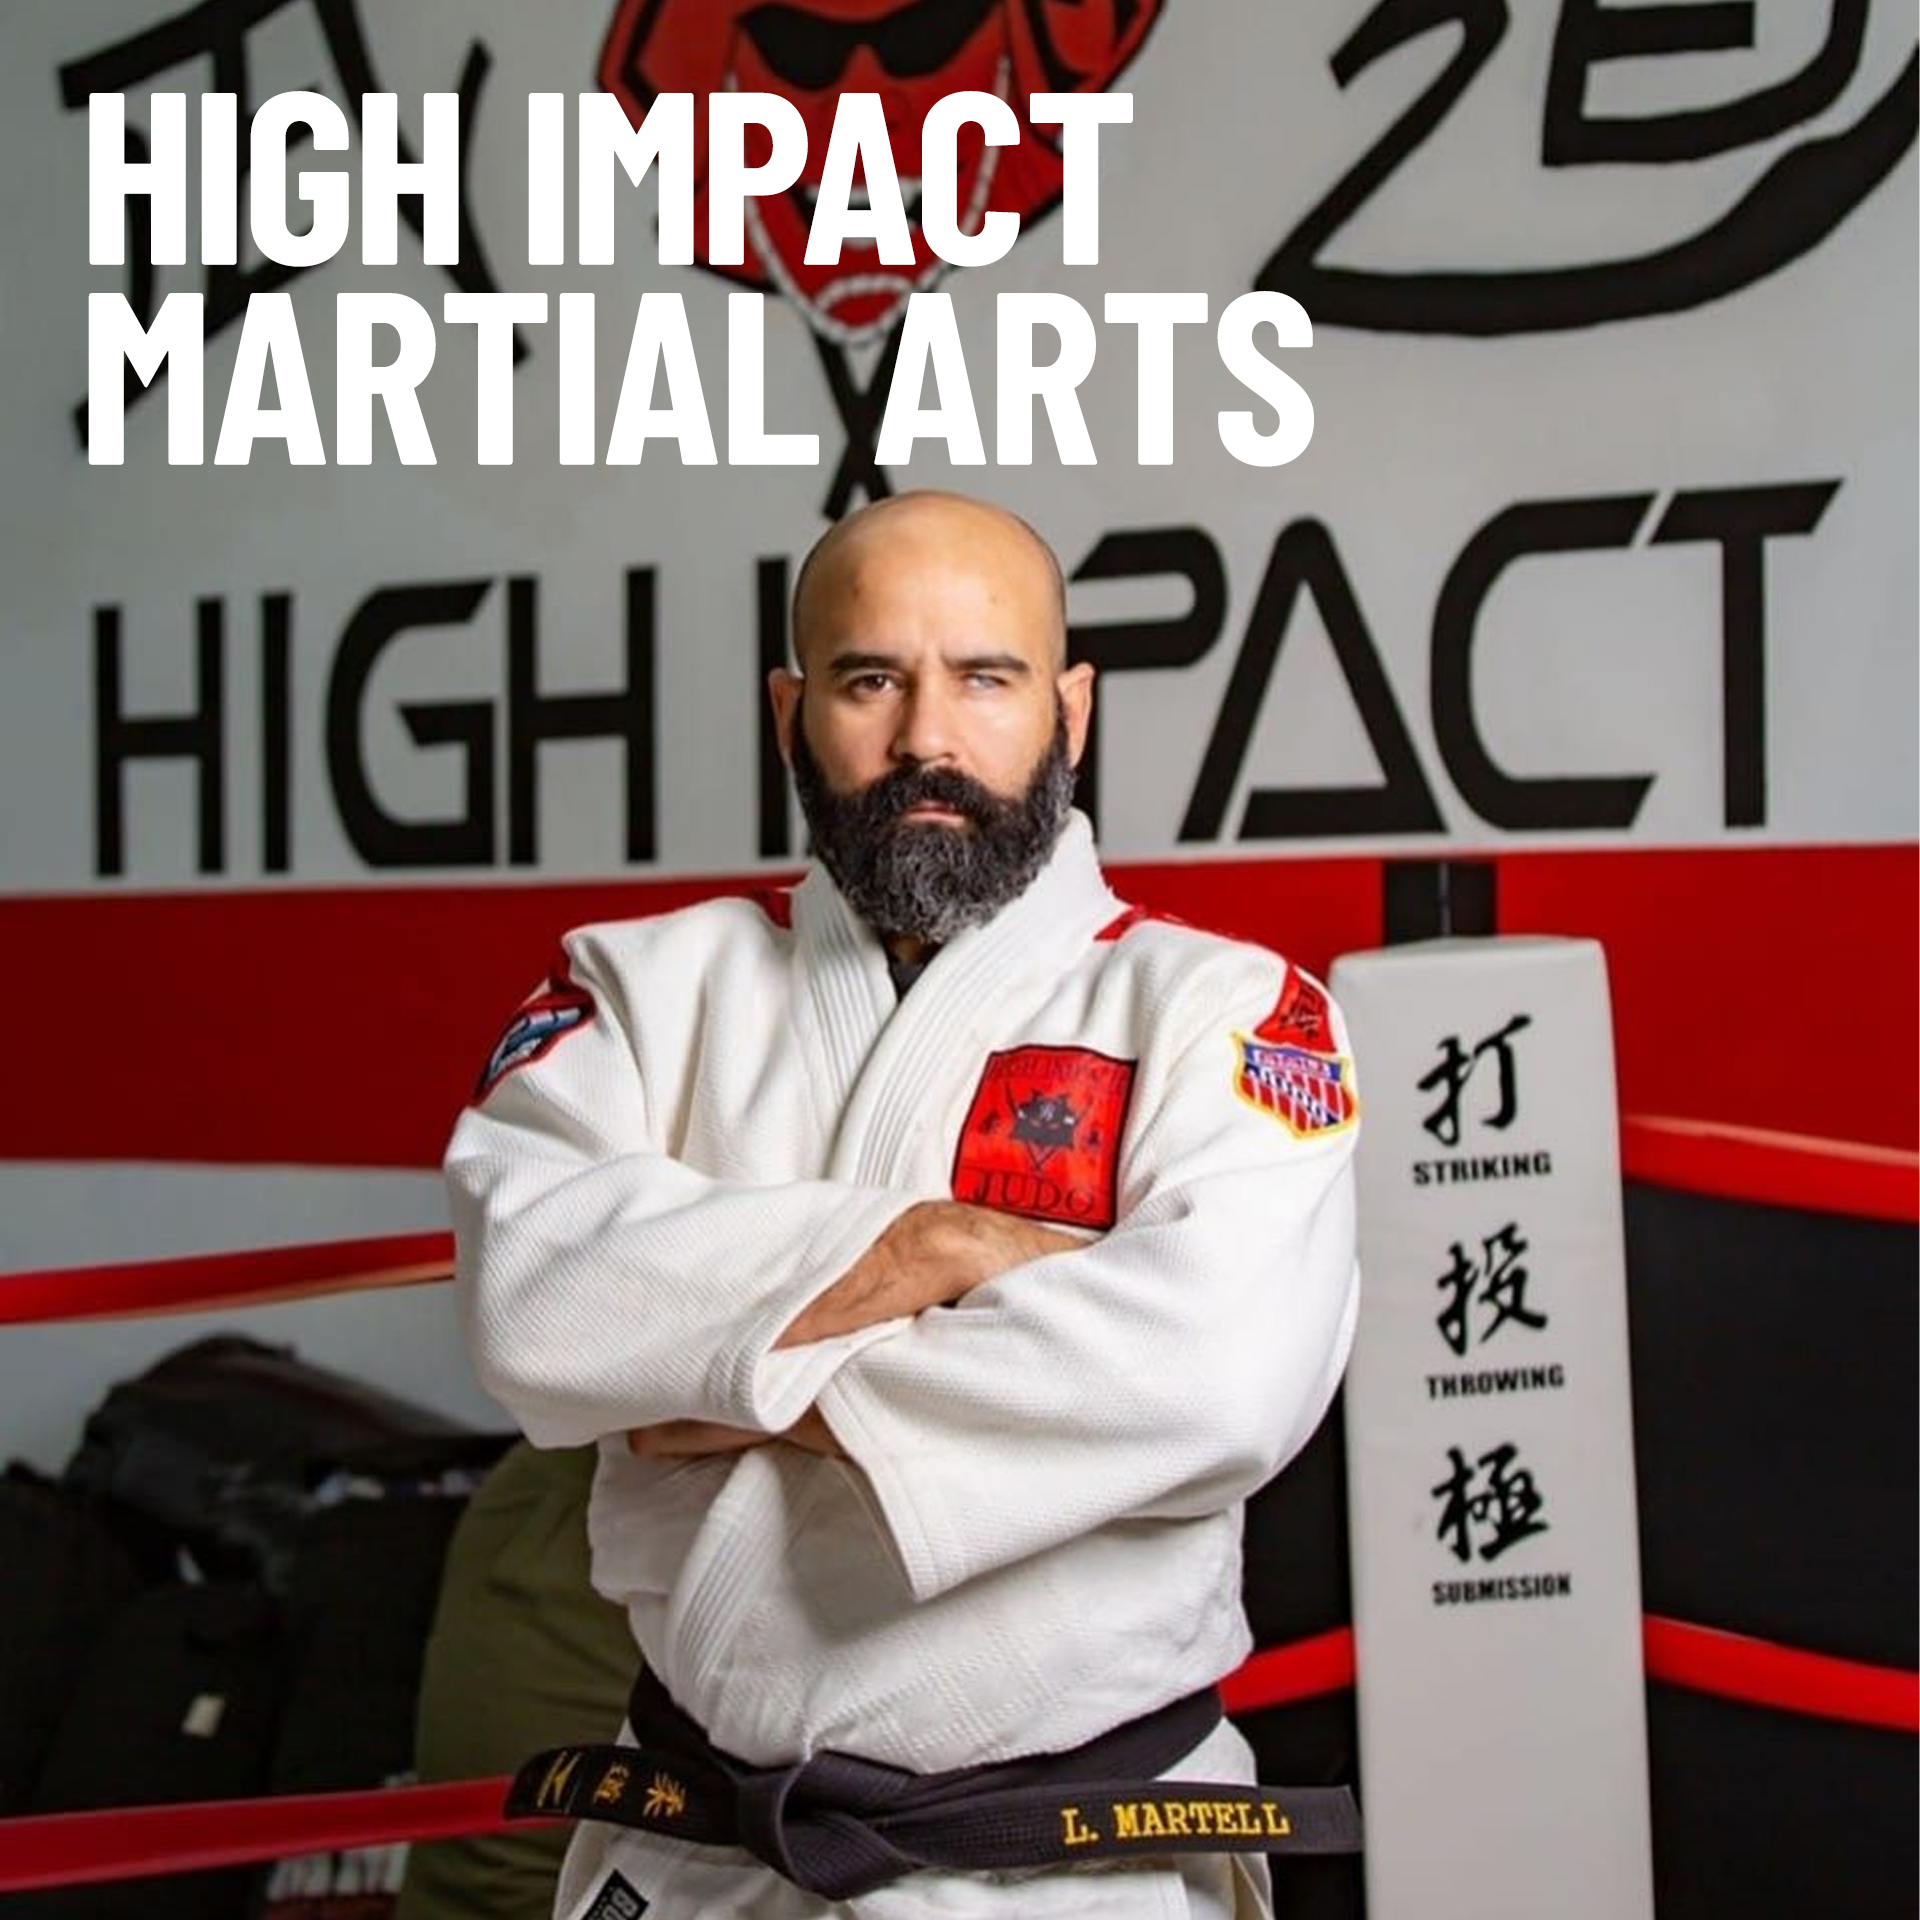 High Impact Martial Arts in West New York, NJ – Martial Arts Academy in